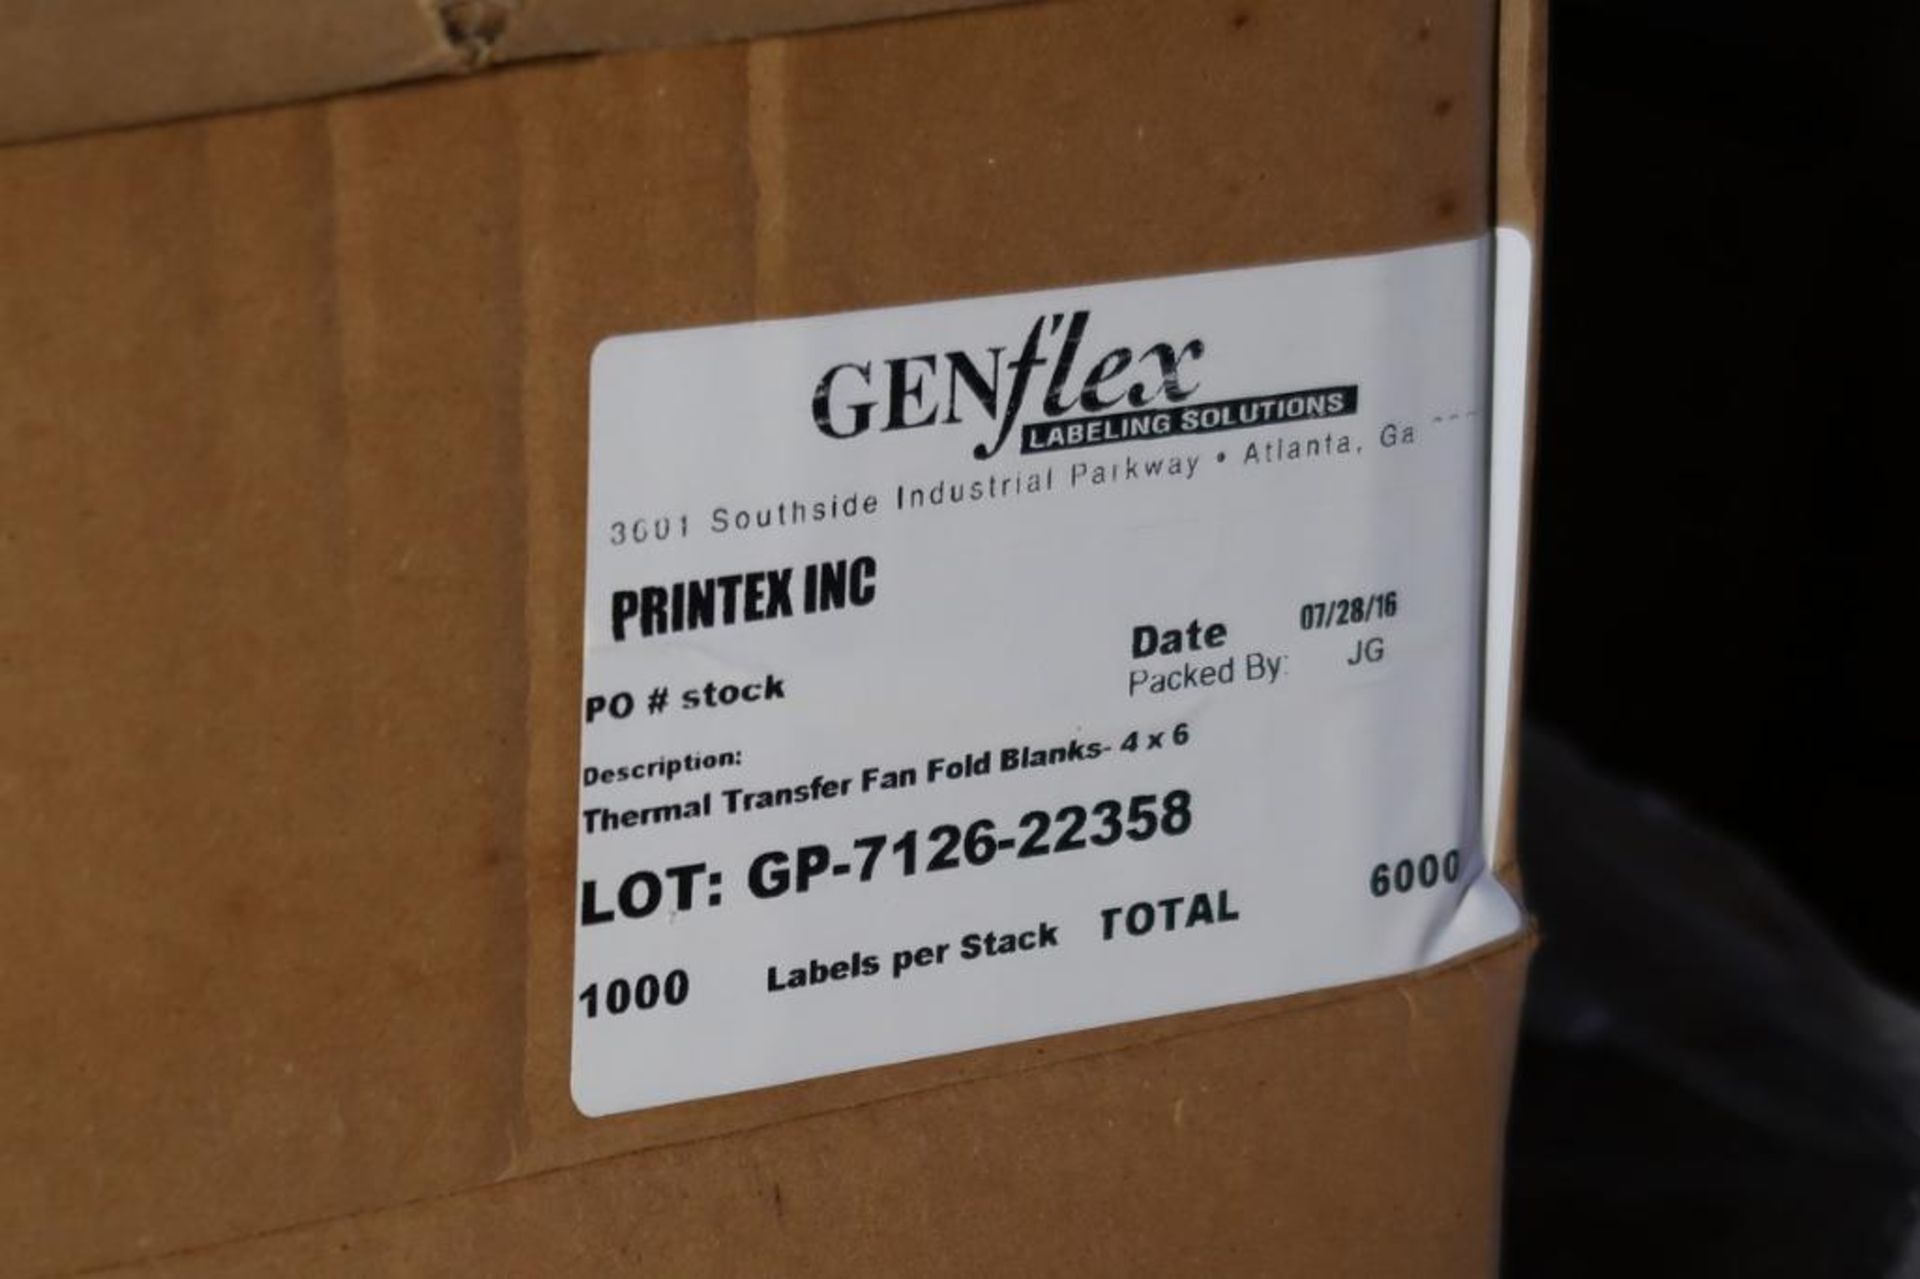 12 Pallets of GenFlex 8" x 3.5" Thermal Transfer Labels - Image 3 of 3